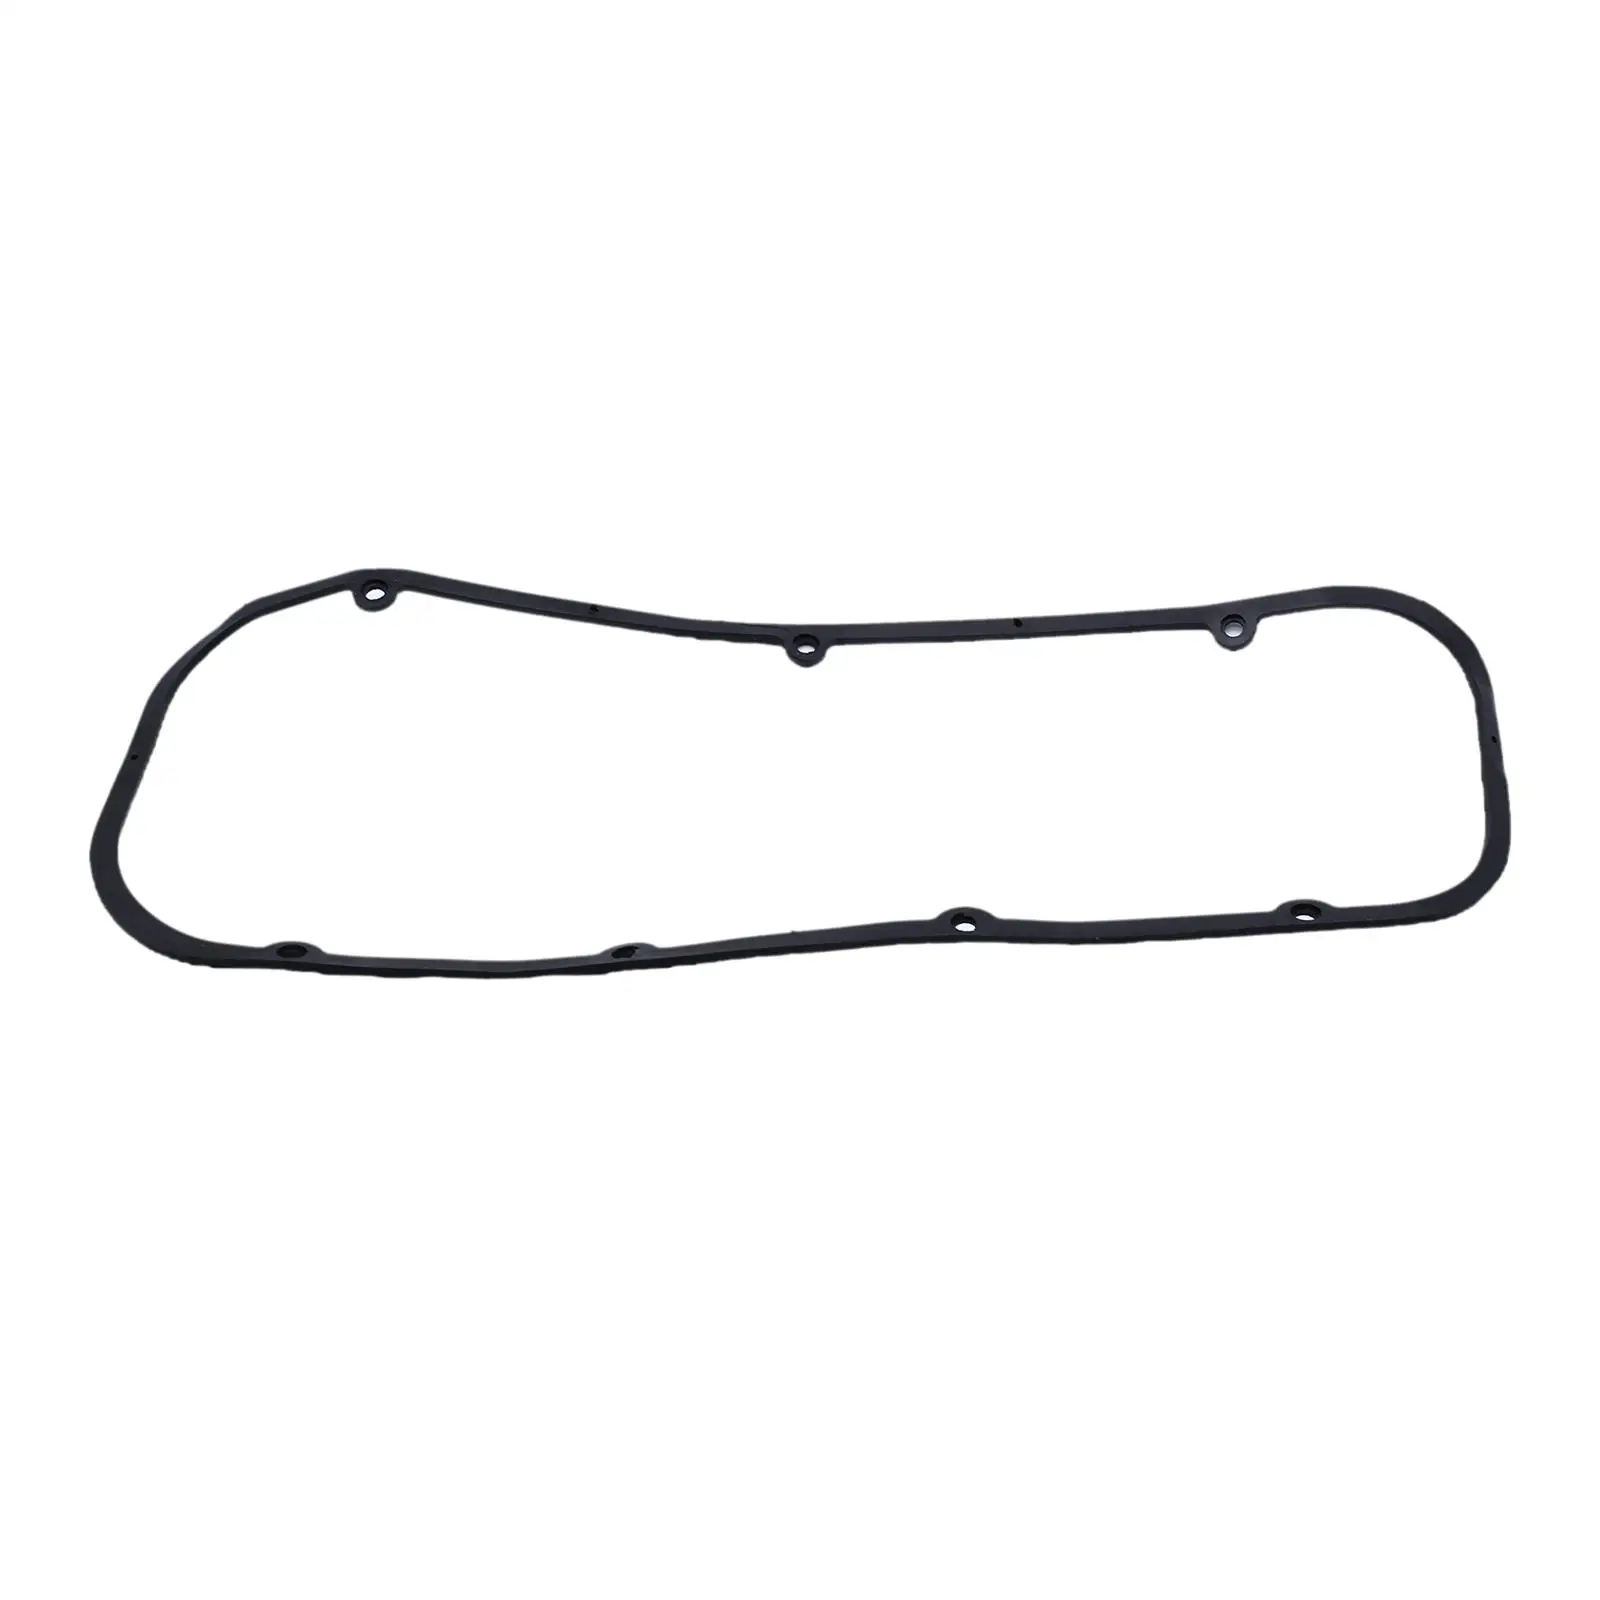 Valve Cover Gaskets Gaskets Seals Fits for Chevy BB 396 427 454 472 502